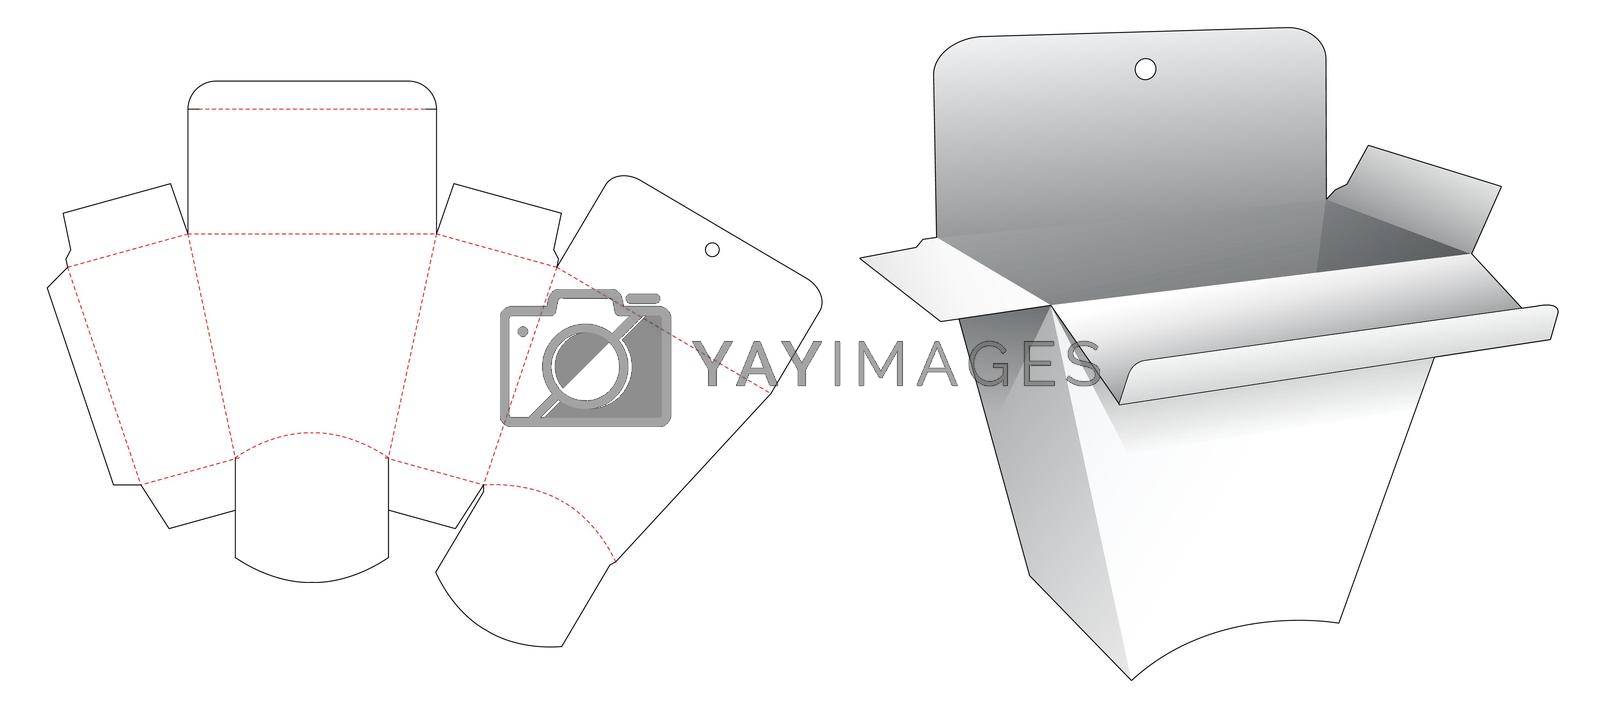 Royalty free image of Hanging hole trapezoid shaped packaging die cut template by valueinvestor